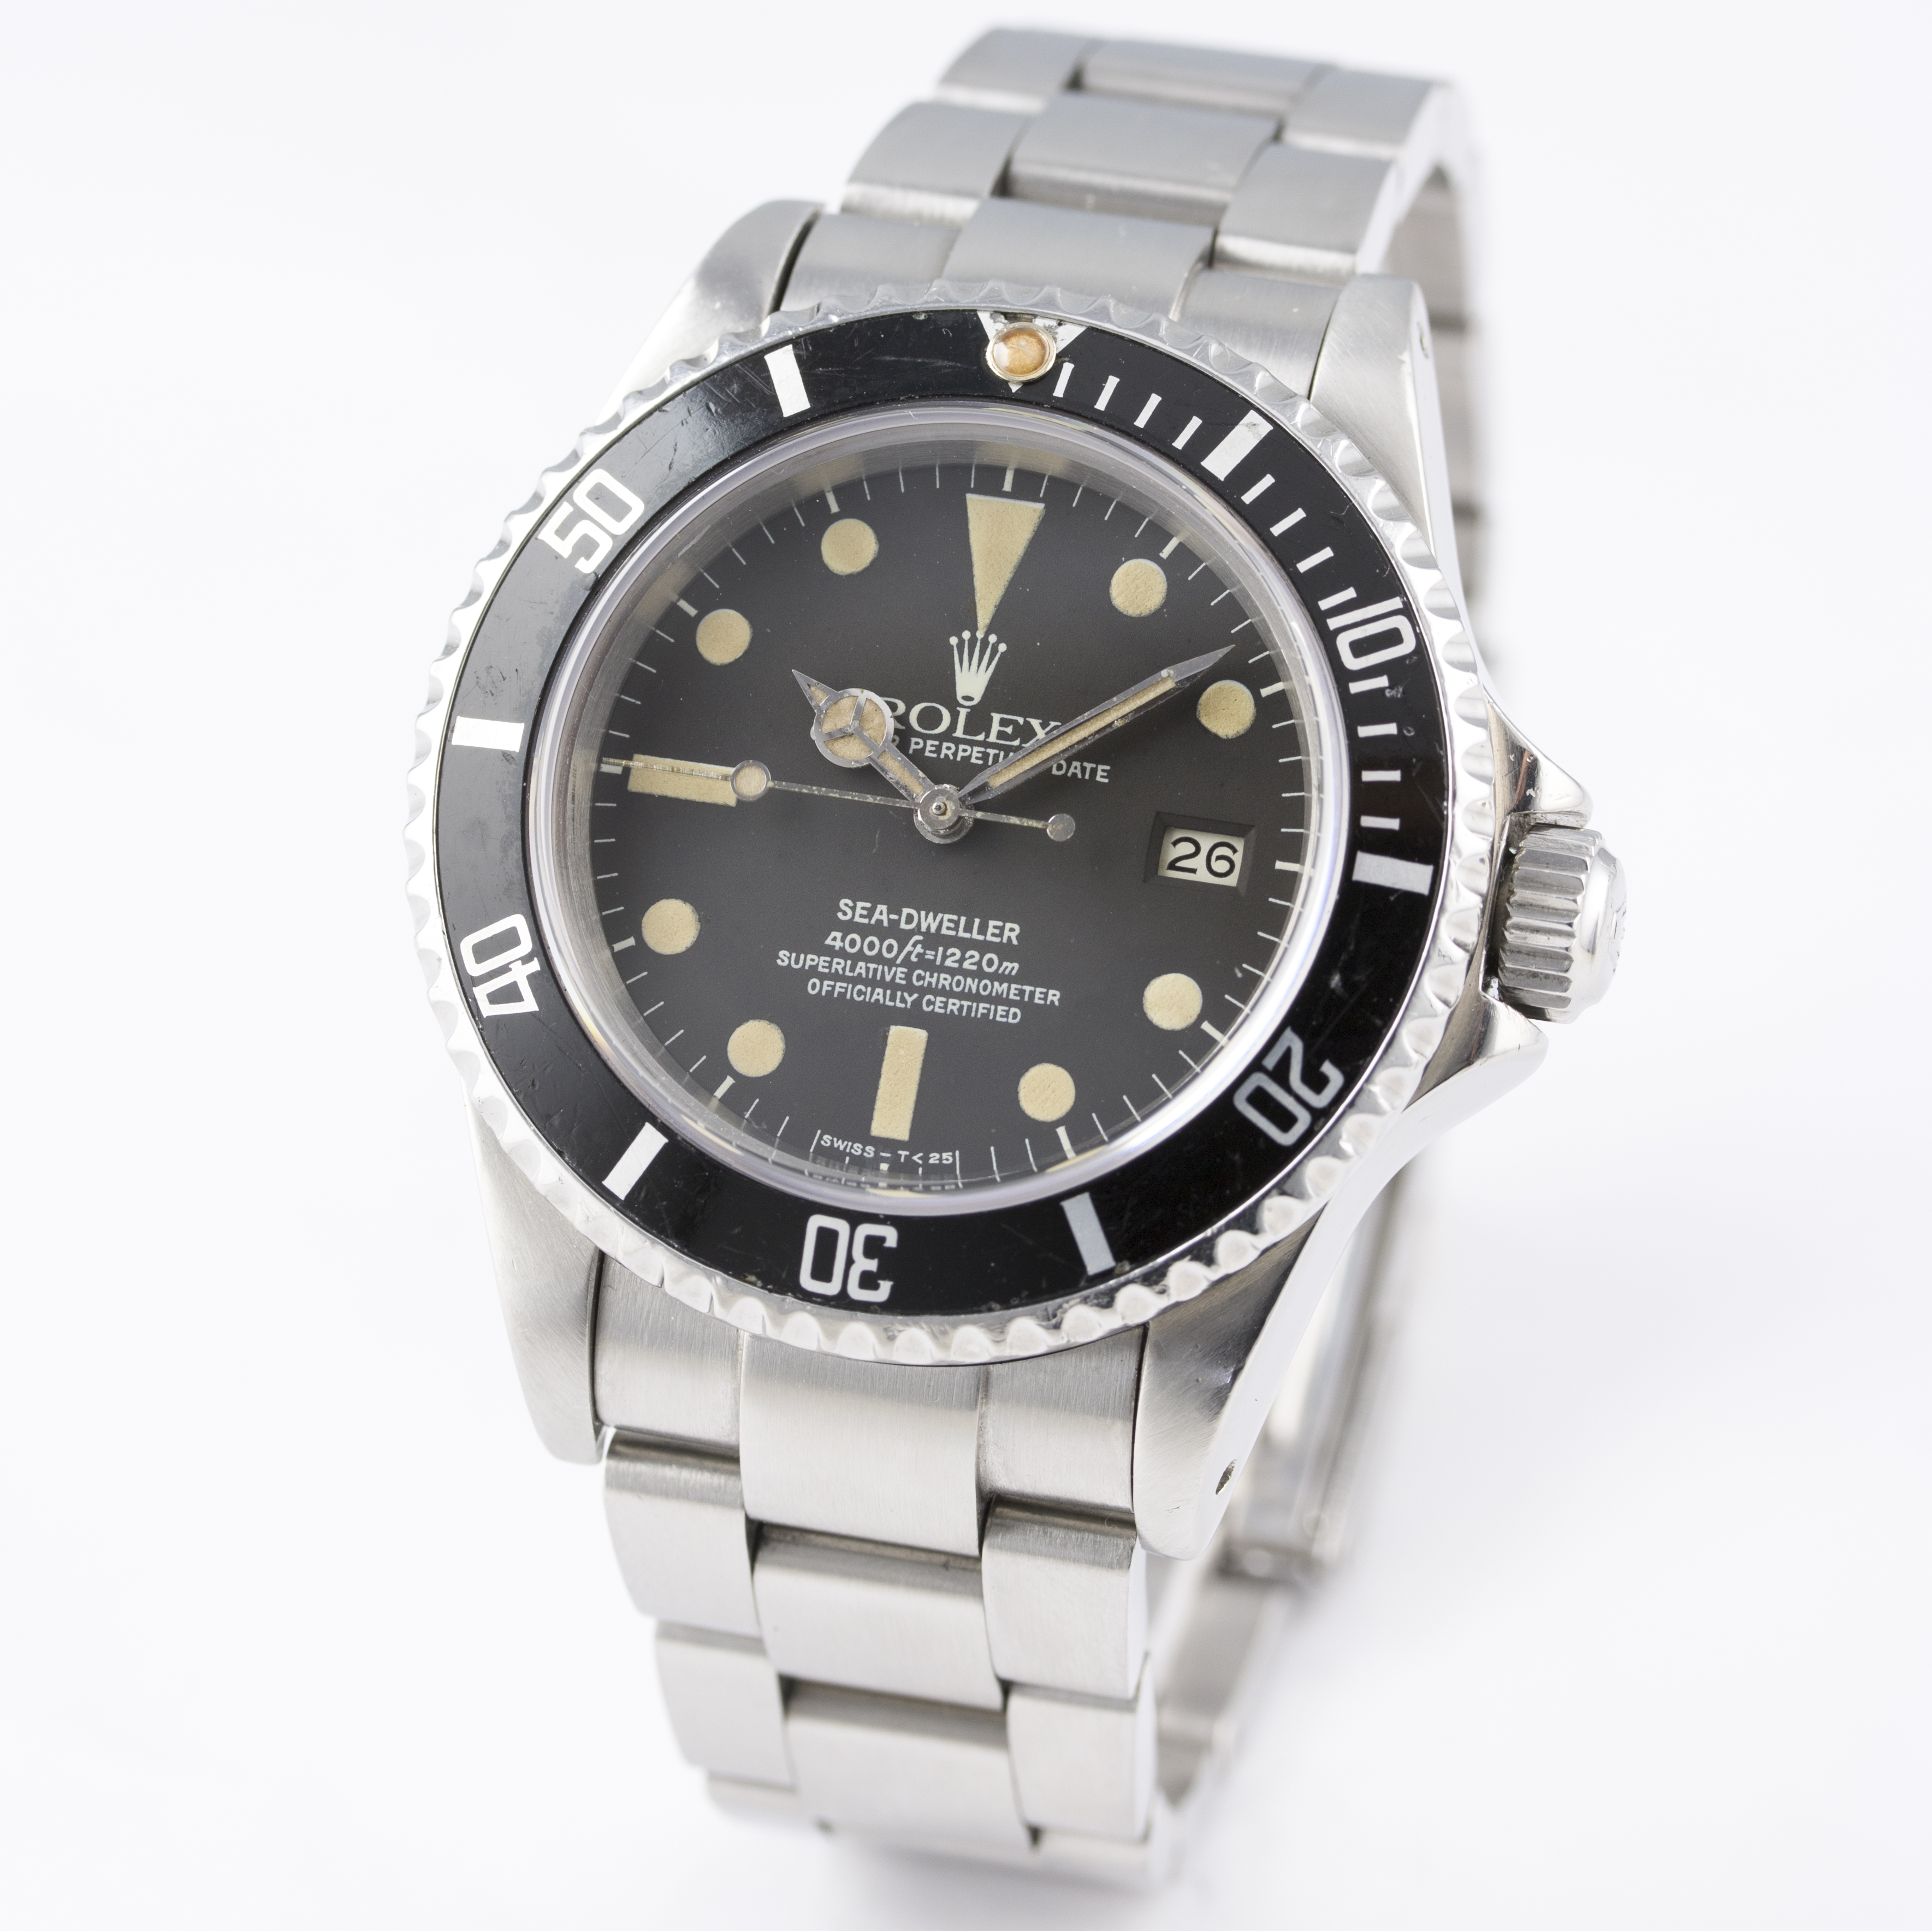 A RARE GENTLEMAN'S STAINLESS STEEL ROLEX OYSTER PERPETUAL DATE SEA DWELLER BRACELET WATCH CIRCA - Image 3 of 8